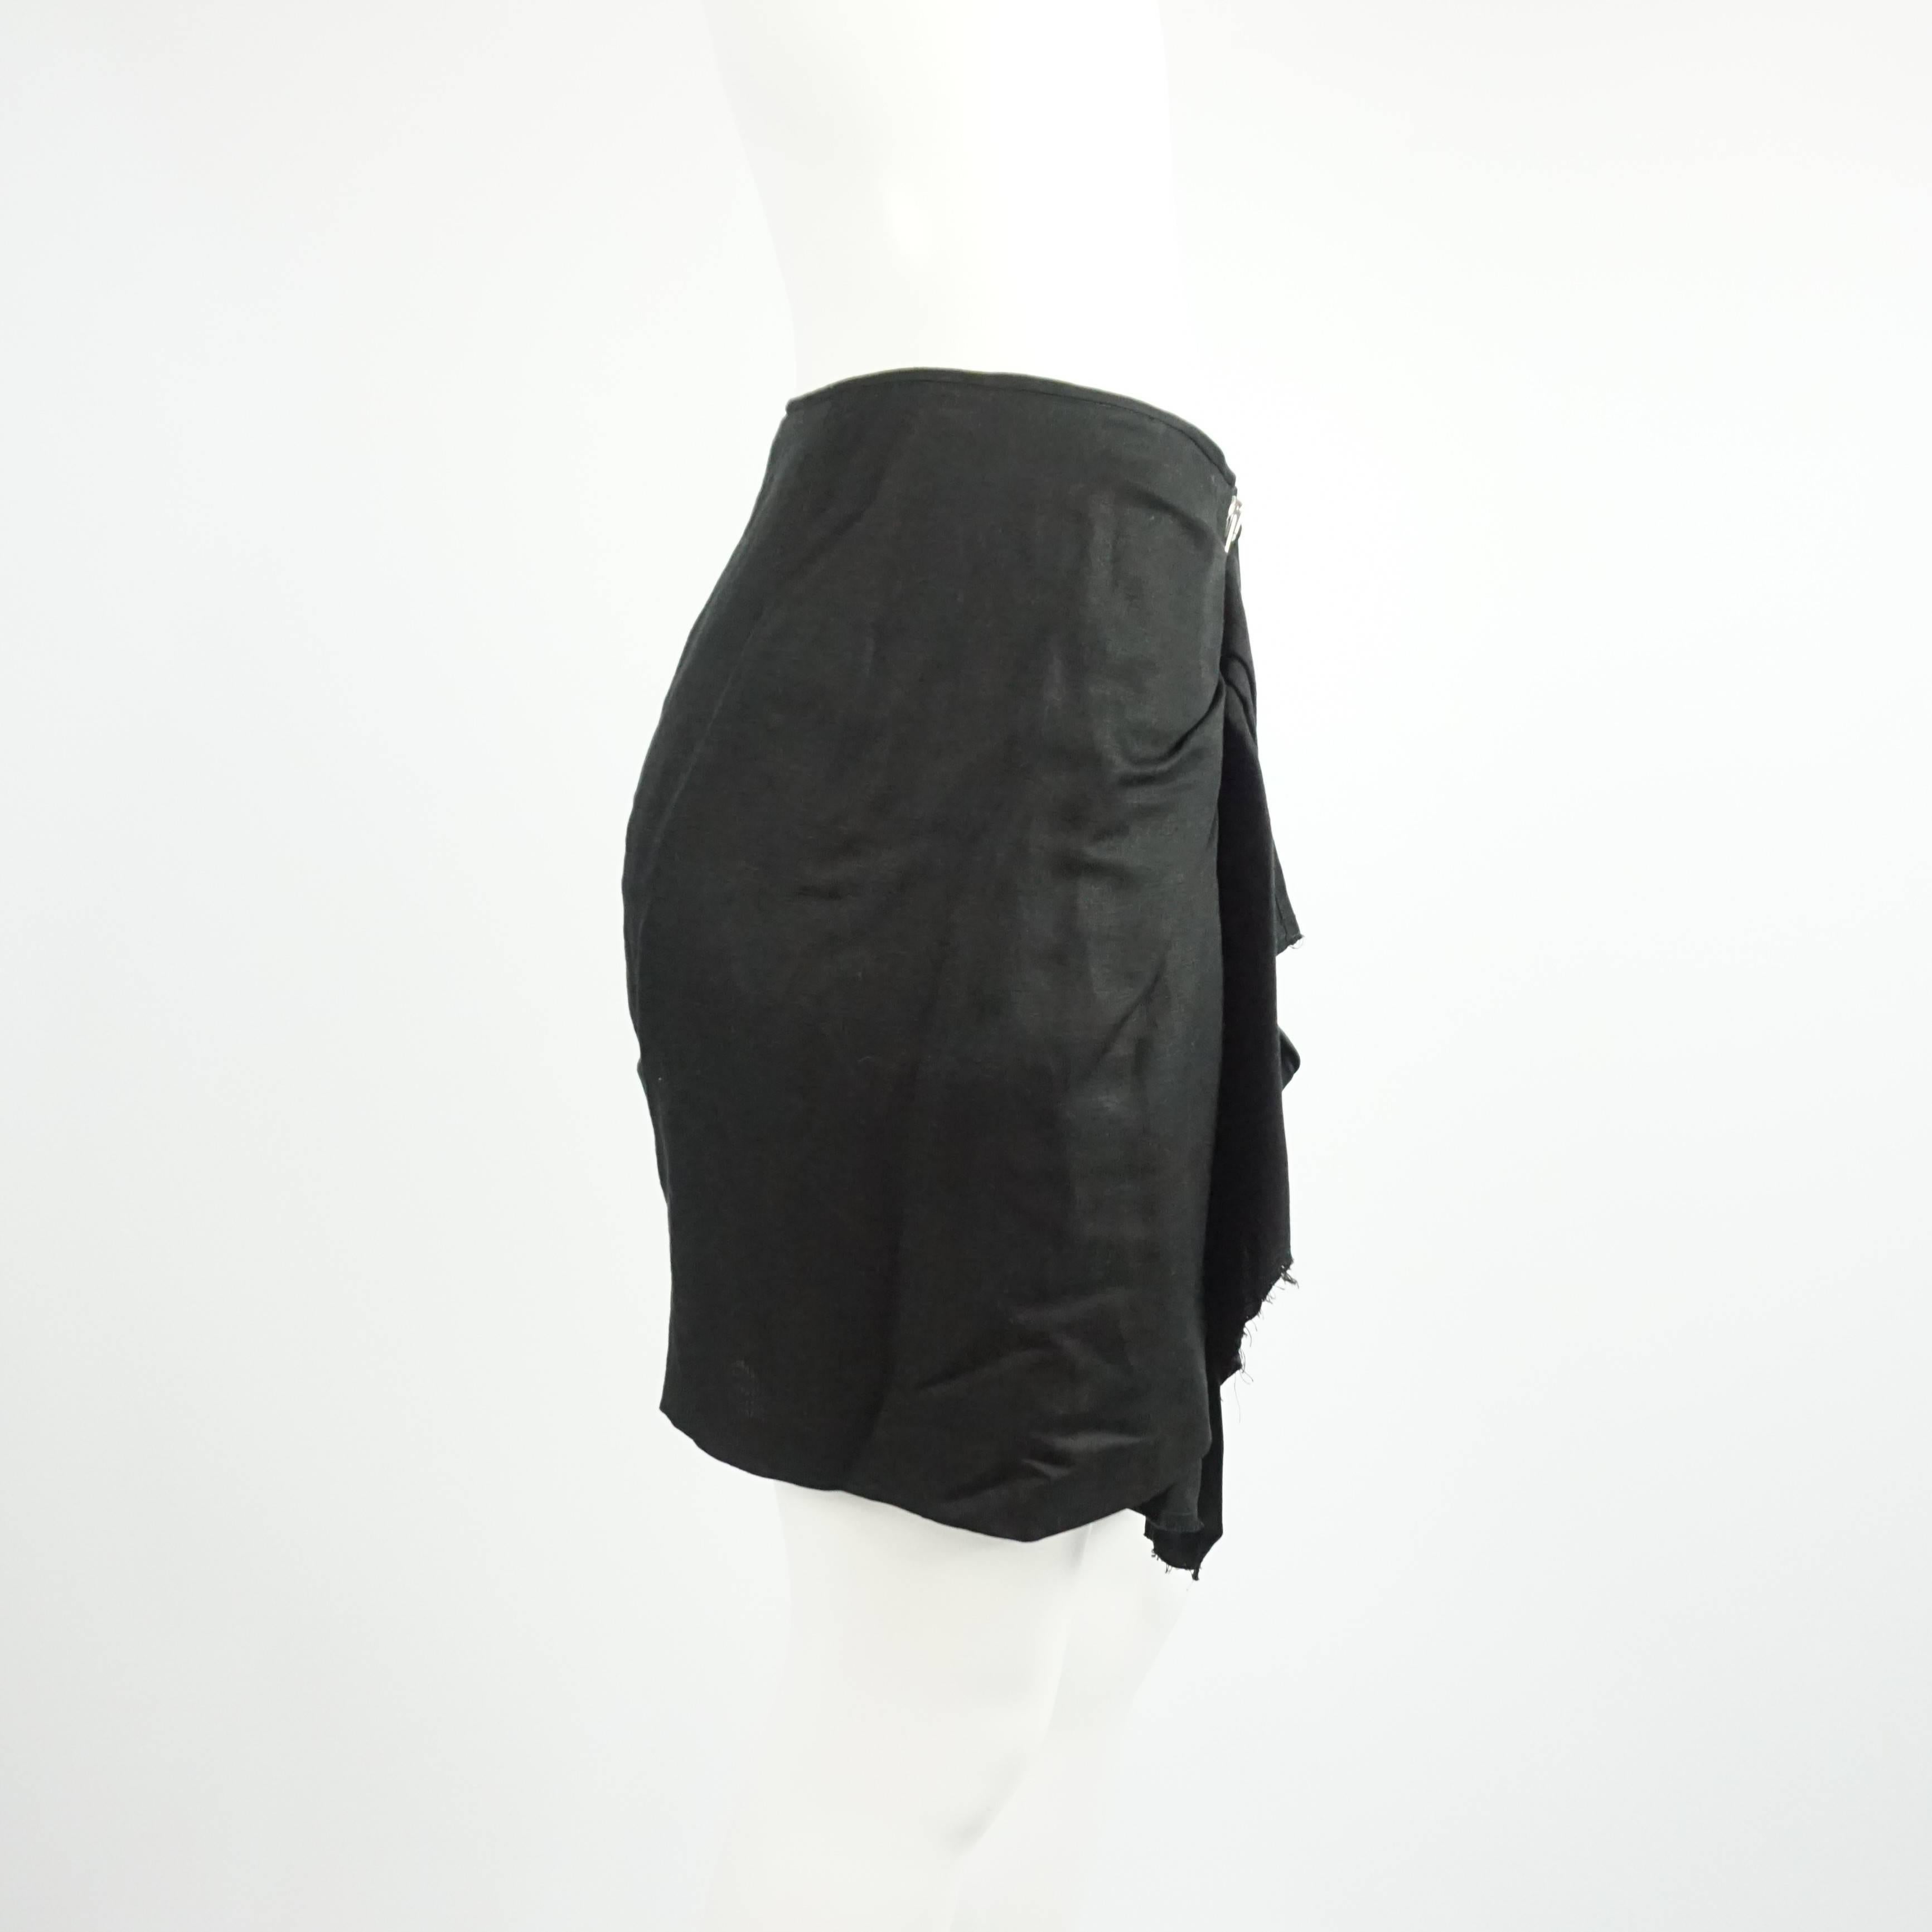 This stunning Isabel Marant skirt is made of black cotton and has a edgy look. The deconstructed skirt features an asymmetrical cut, rushing, and a silver zipper. It is in excellent condition with minimal wear. Size 3, circa 21st